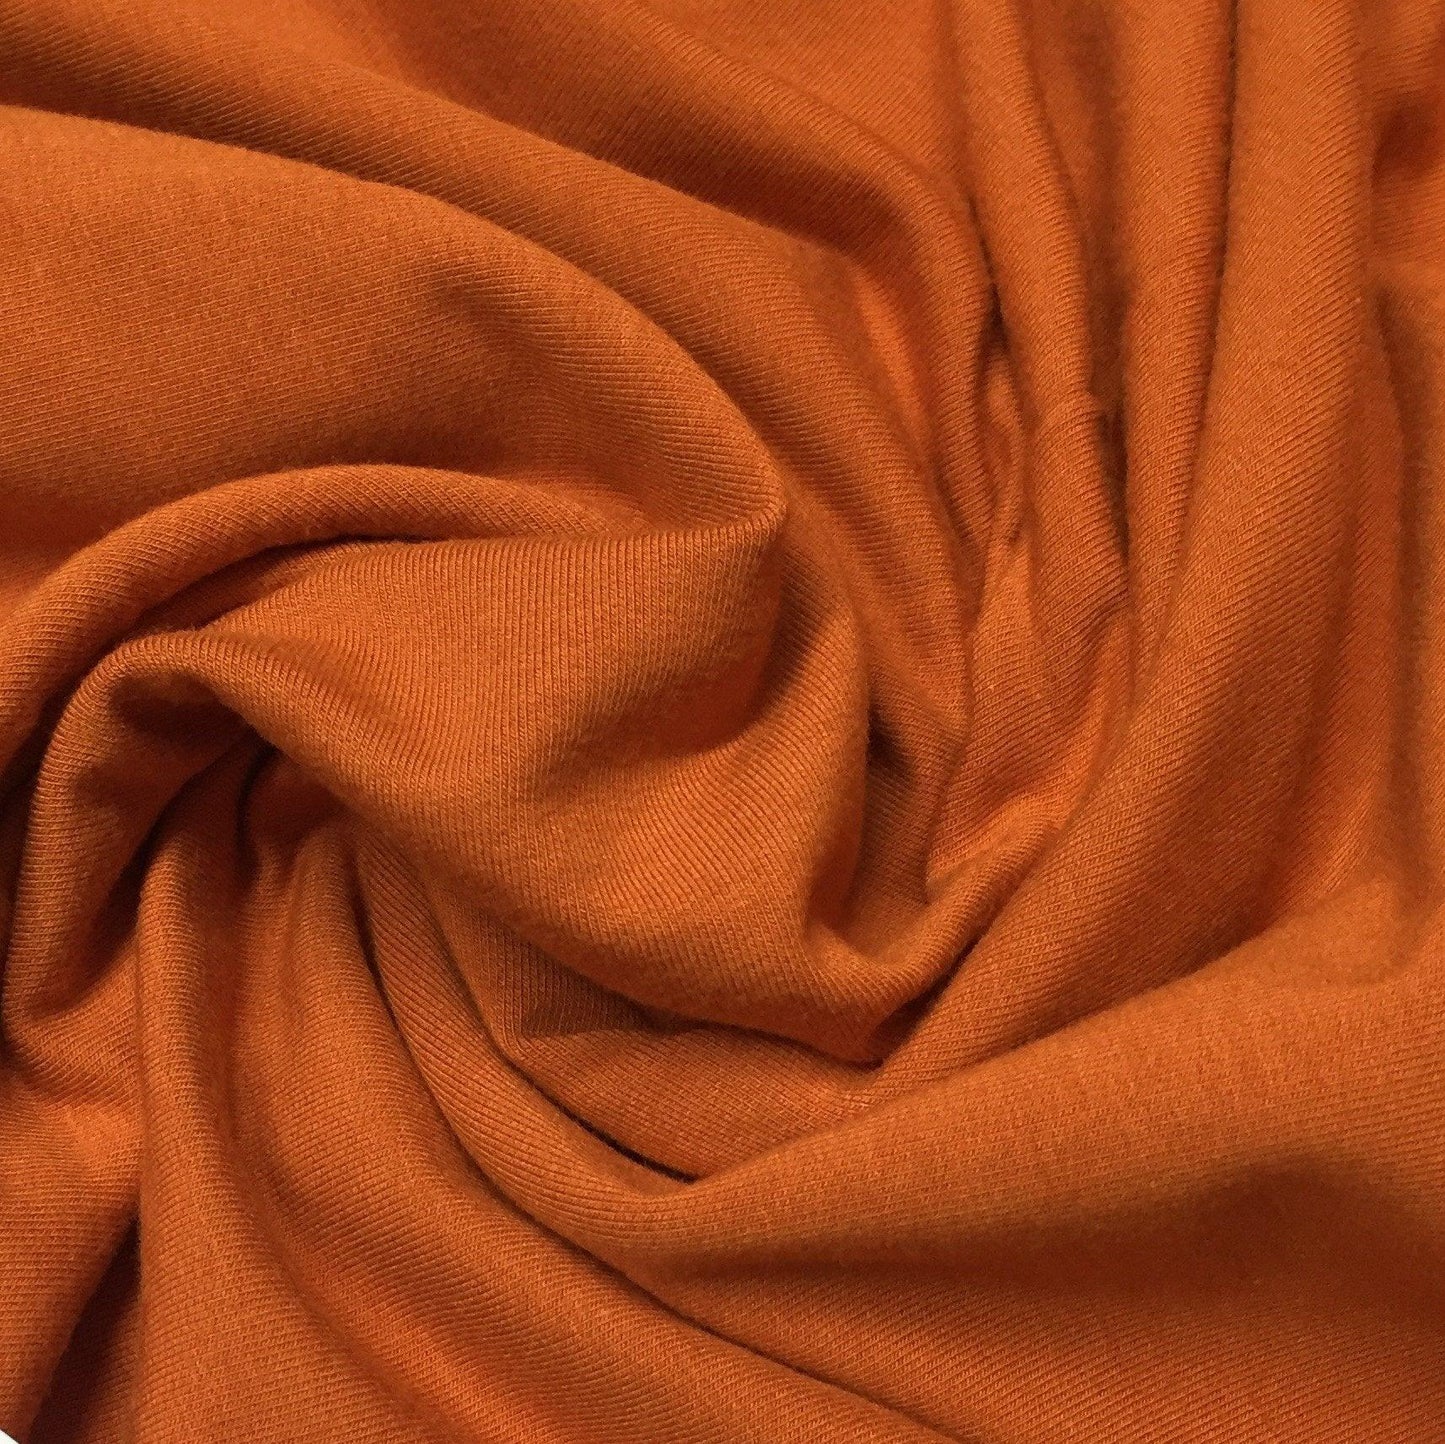 Pumpkin Spice Bamboo Stretch French Terry Fabric- 265 GSM, $12.86/yd, 15 Yards - Nature's Fabrics